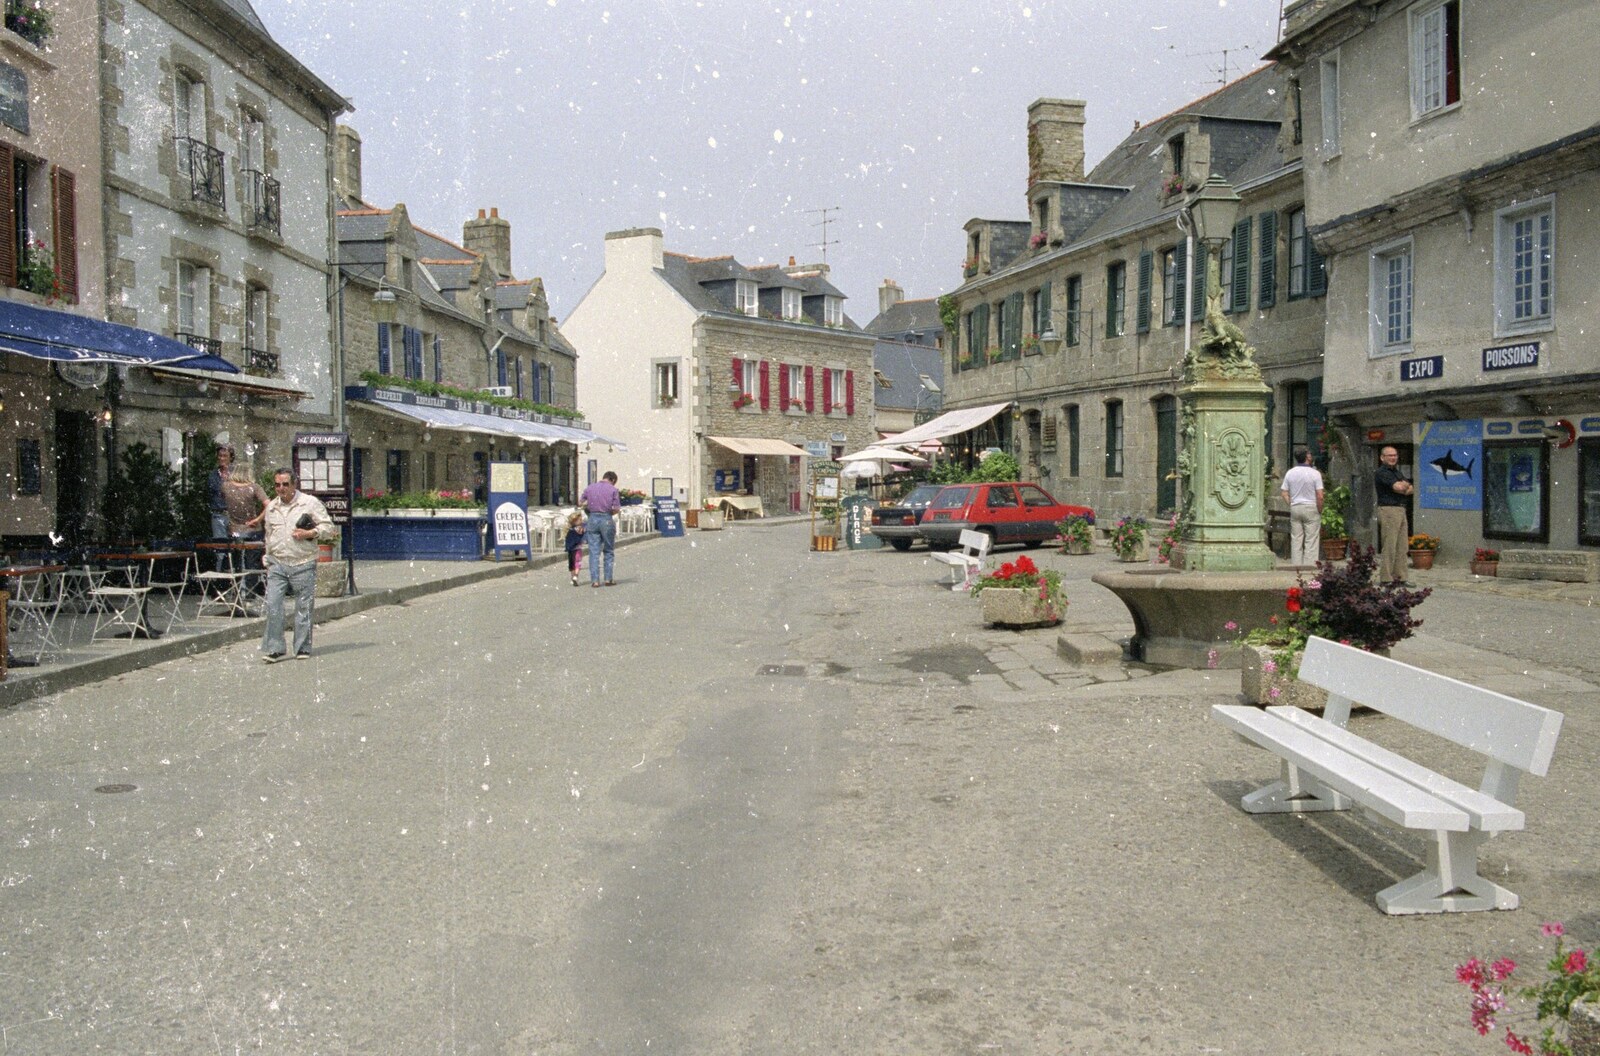 A Trip To Huelgoat, Brittany, France - 11th June 1990: French town scene